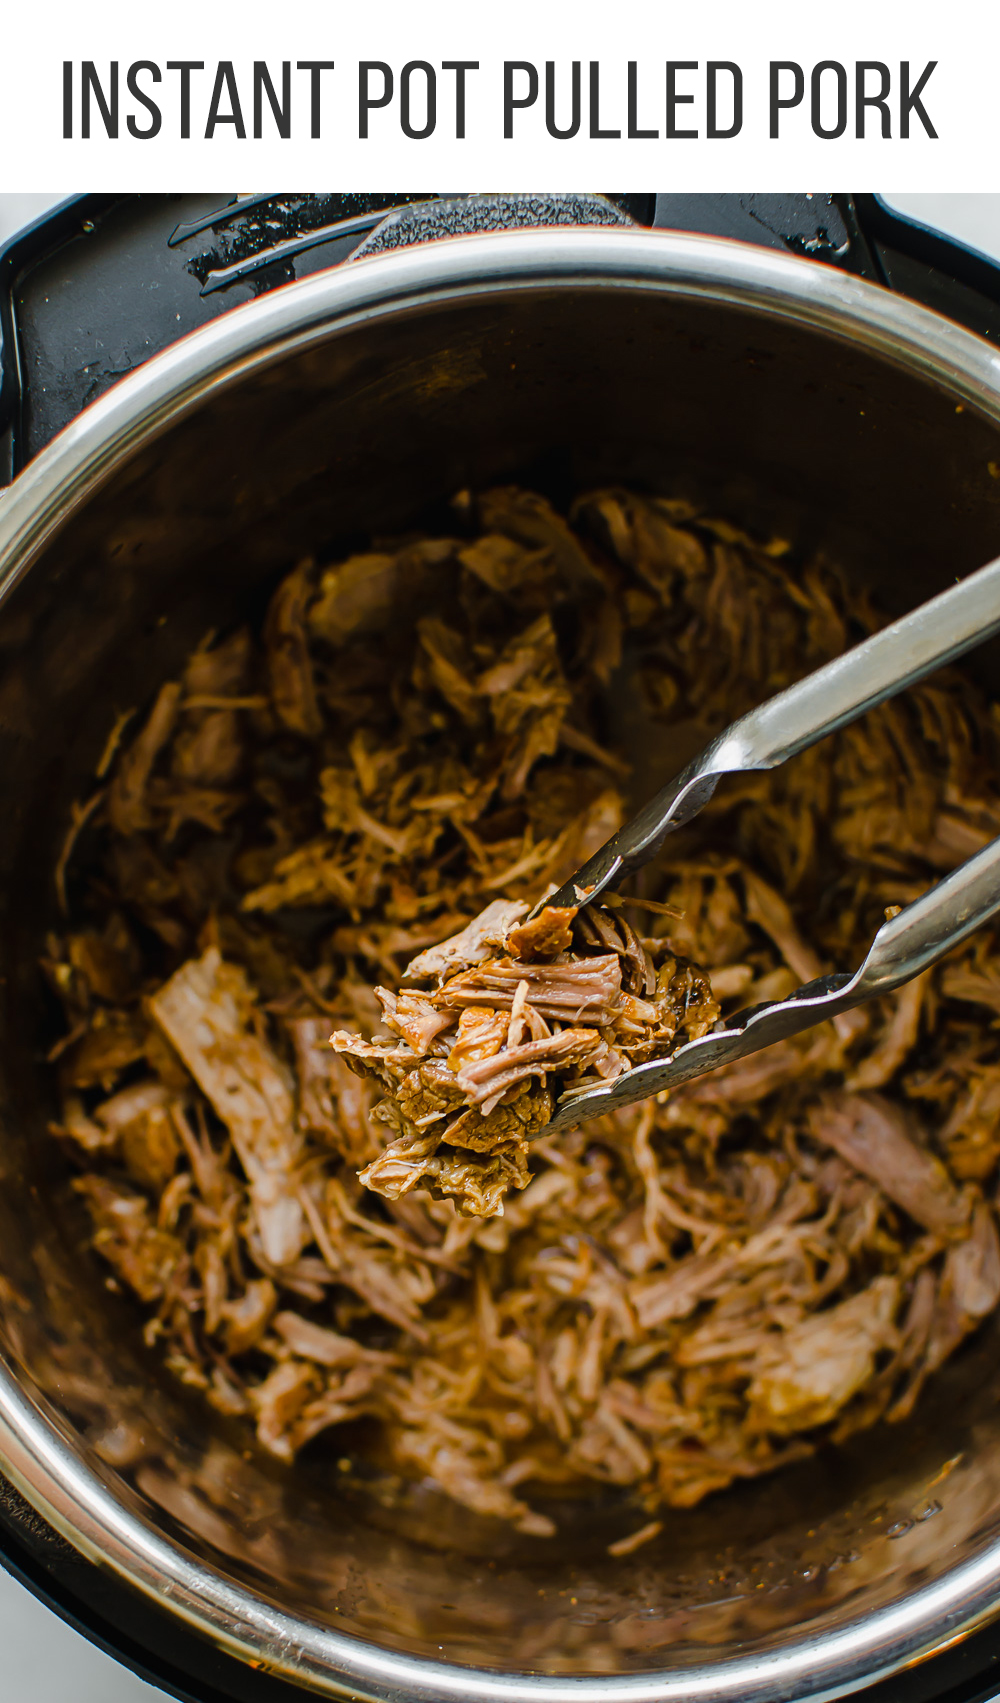 Pulled pork in the instant pot with tongs holding a serving.